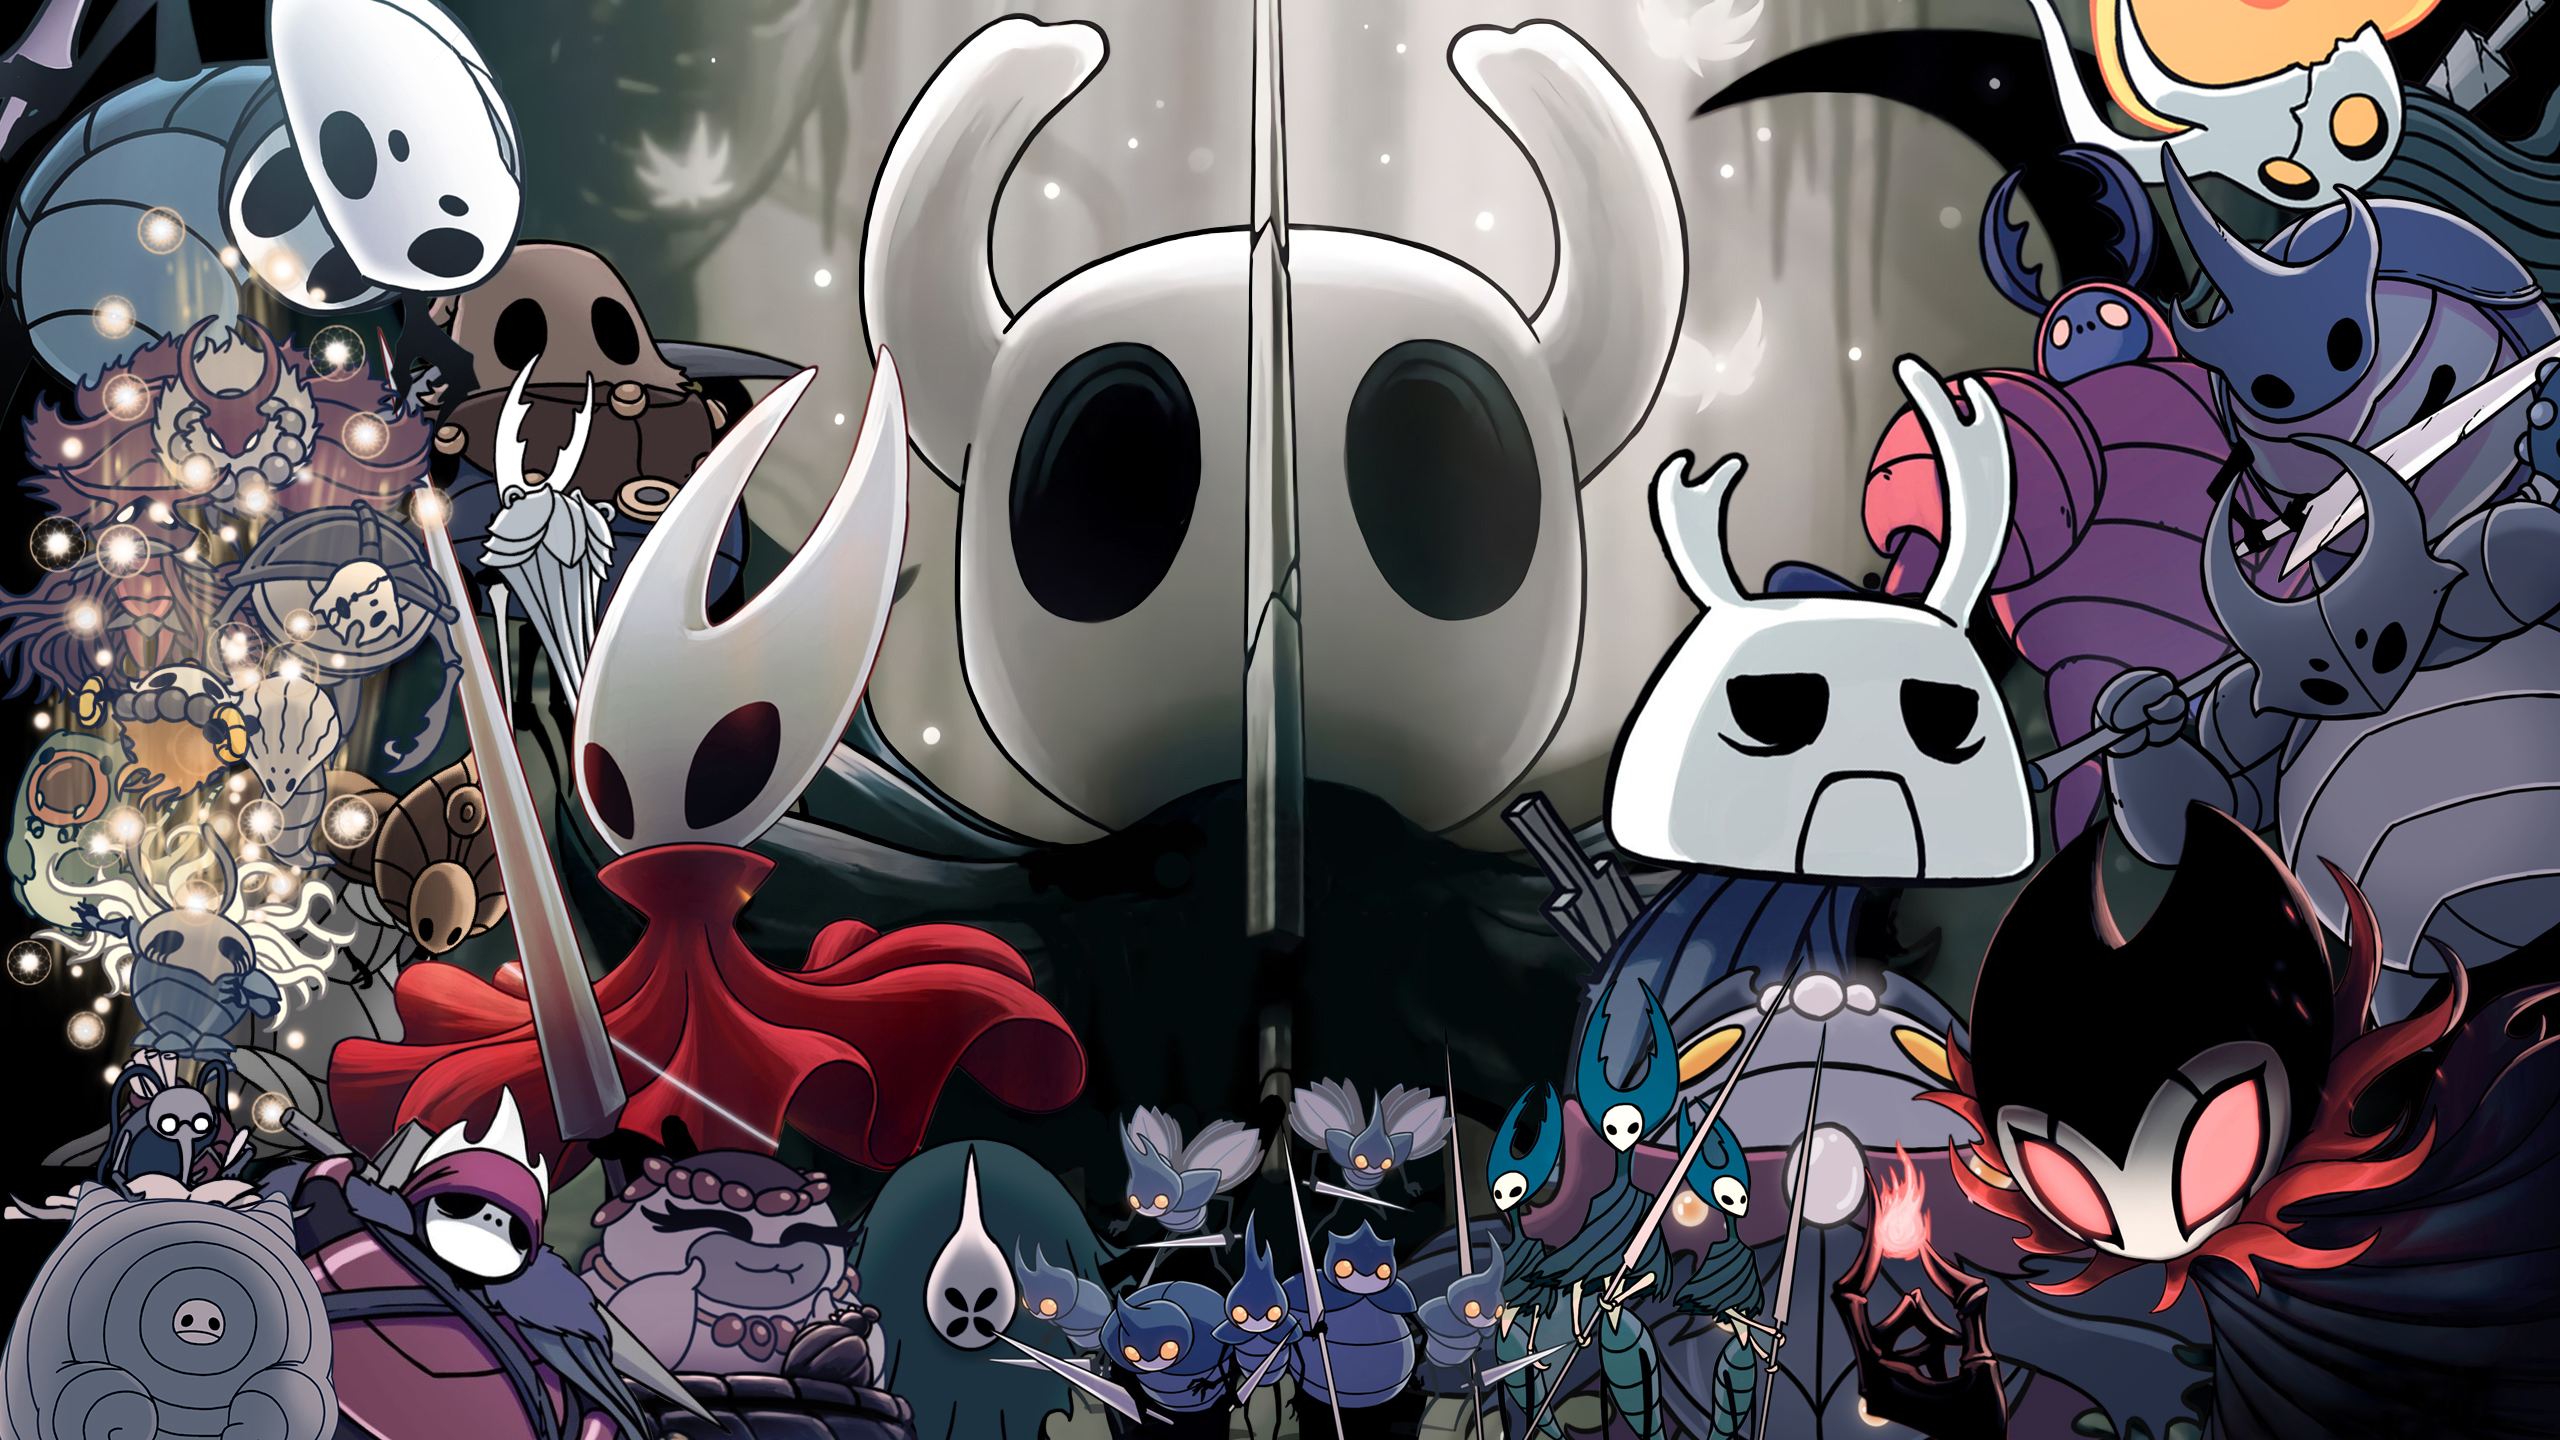 Hollow Knight Wallpapers